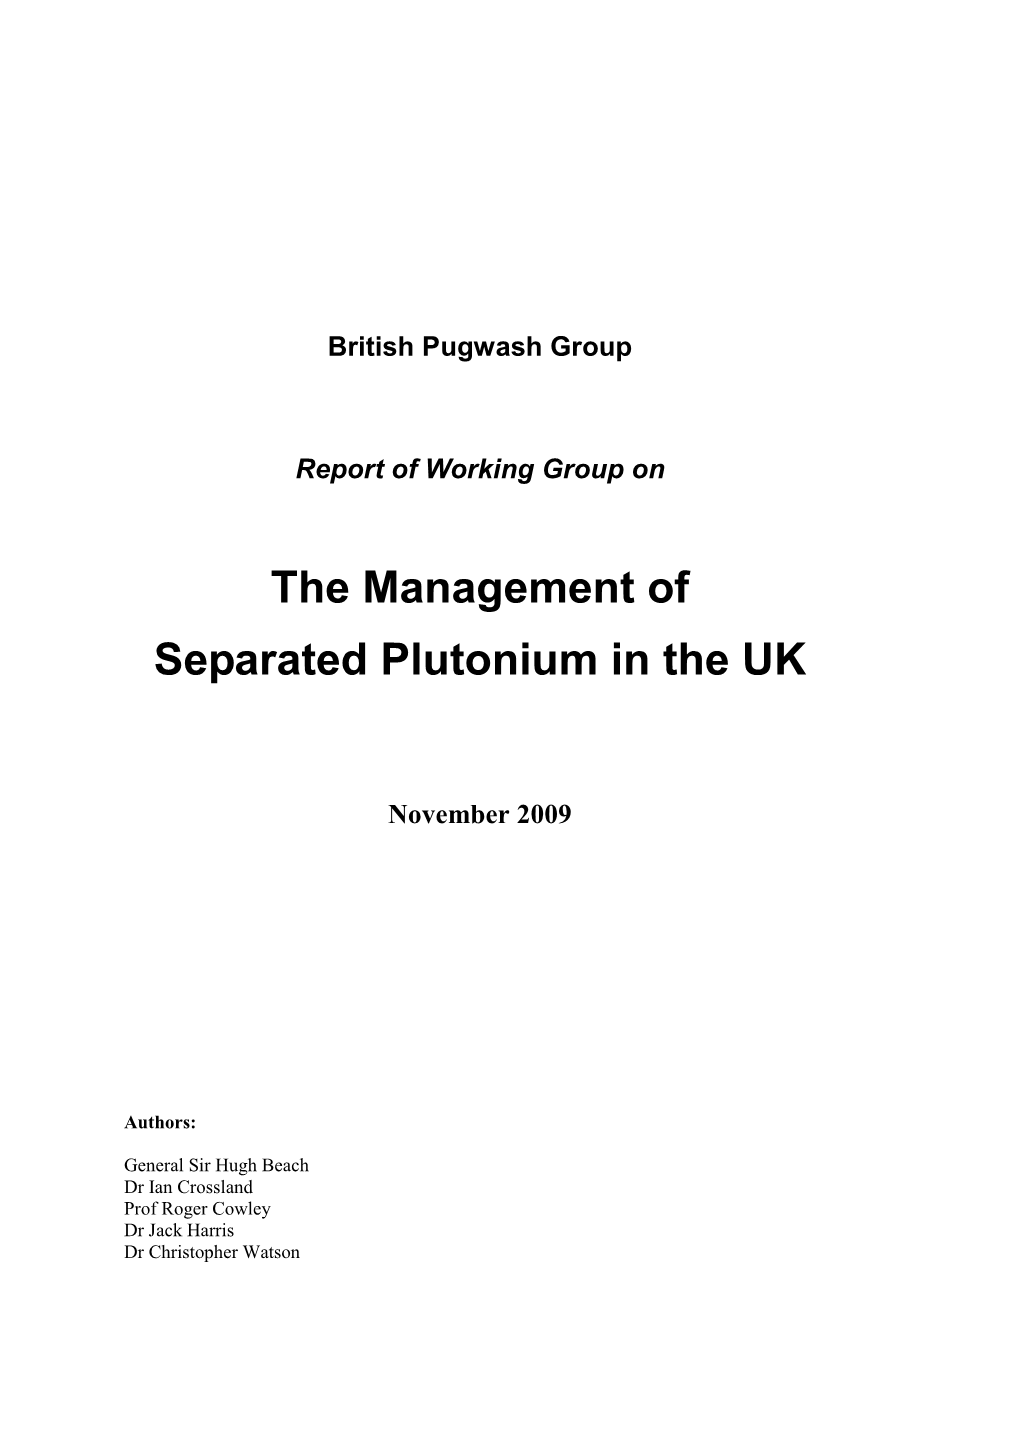 The Management of Separated Plutonium in the UK